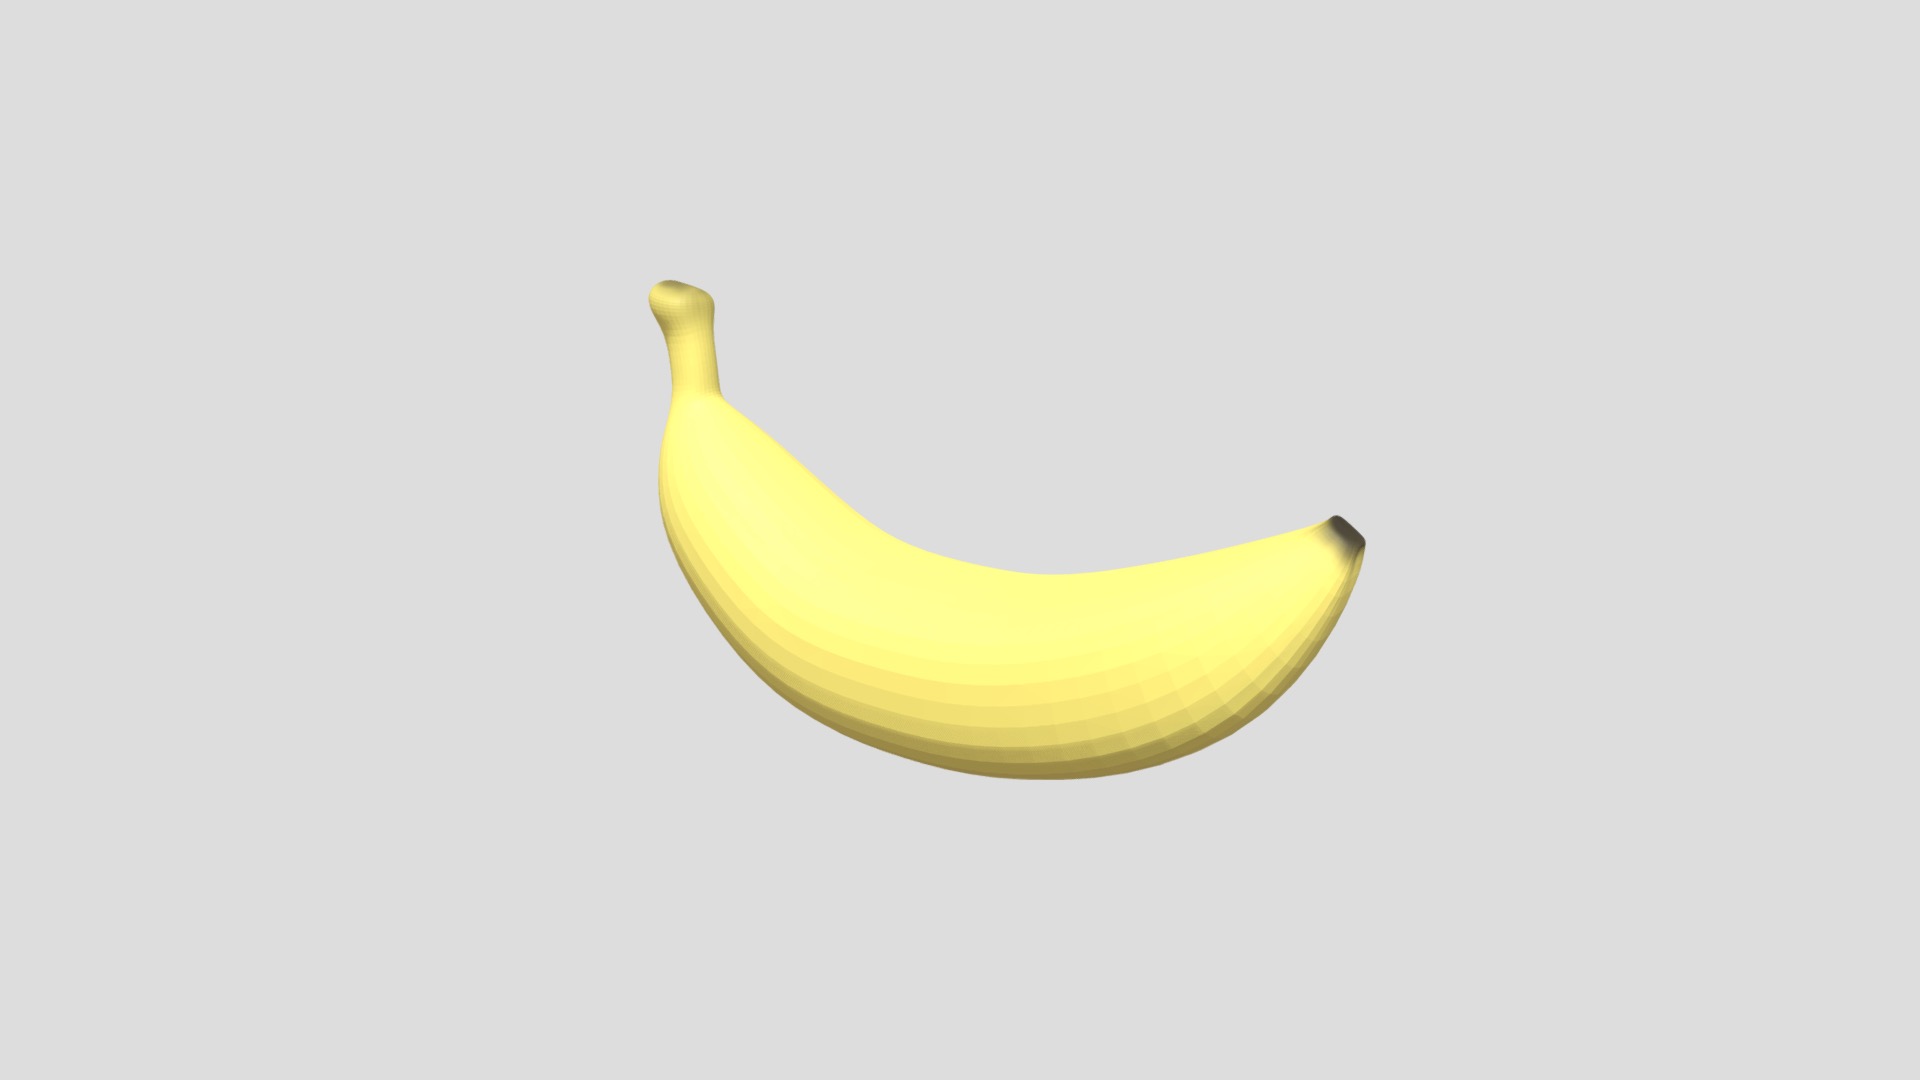 3D model Banana - This is a 3D model of the Banana. The 3D model is about a yellow banana on a white background.